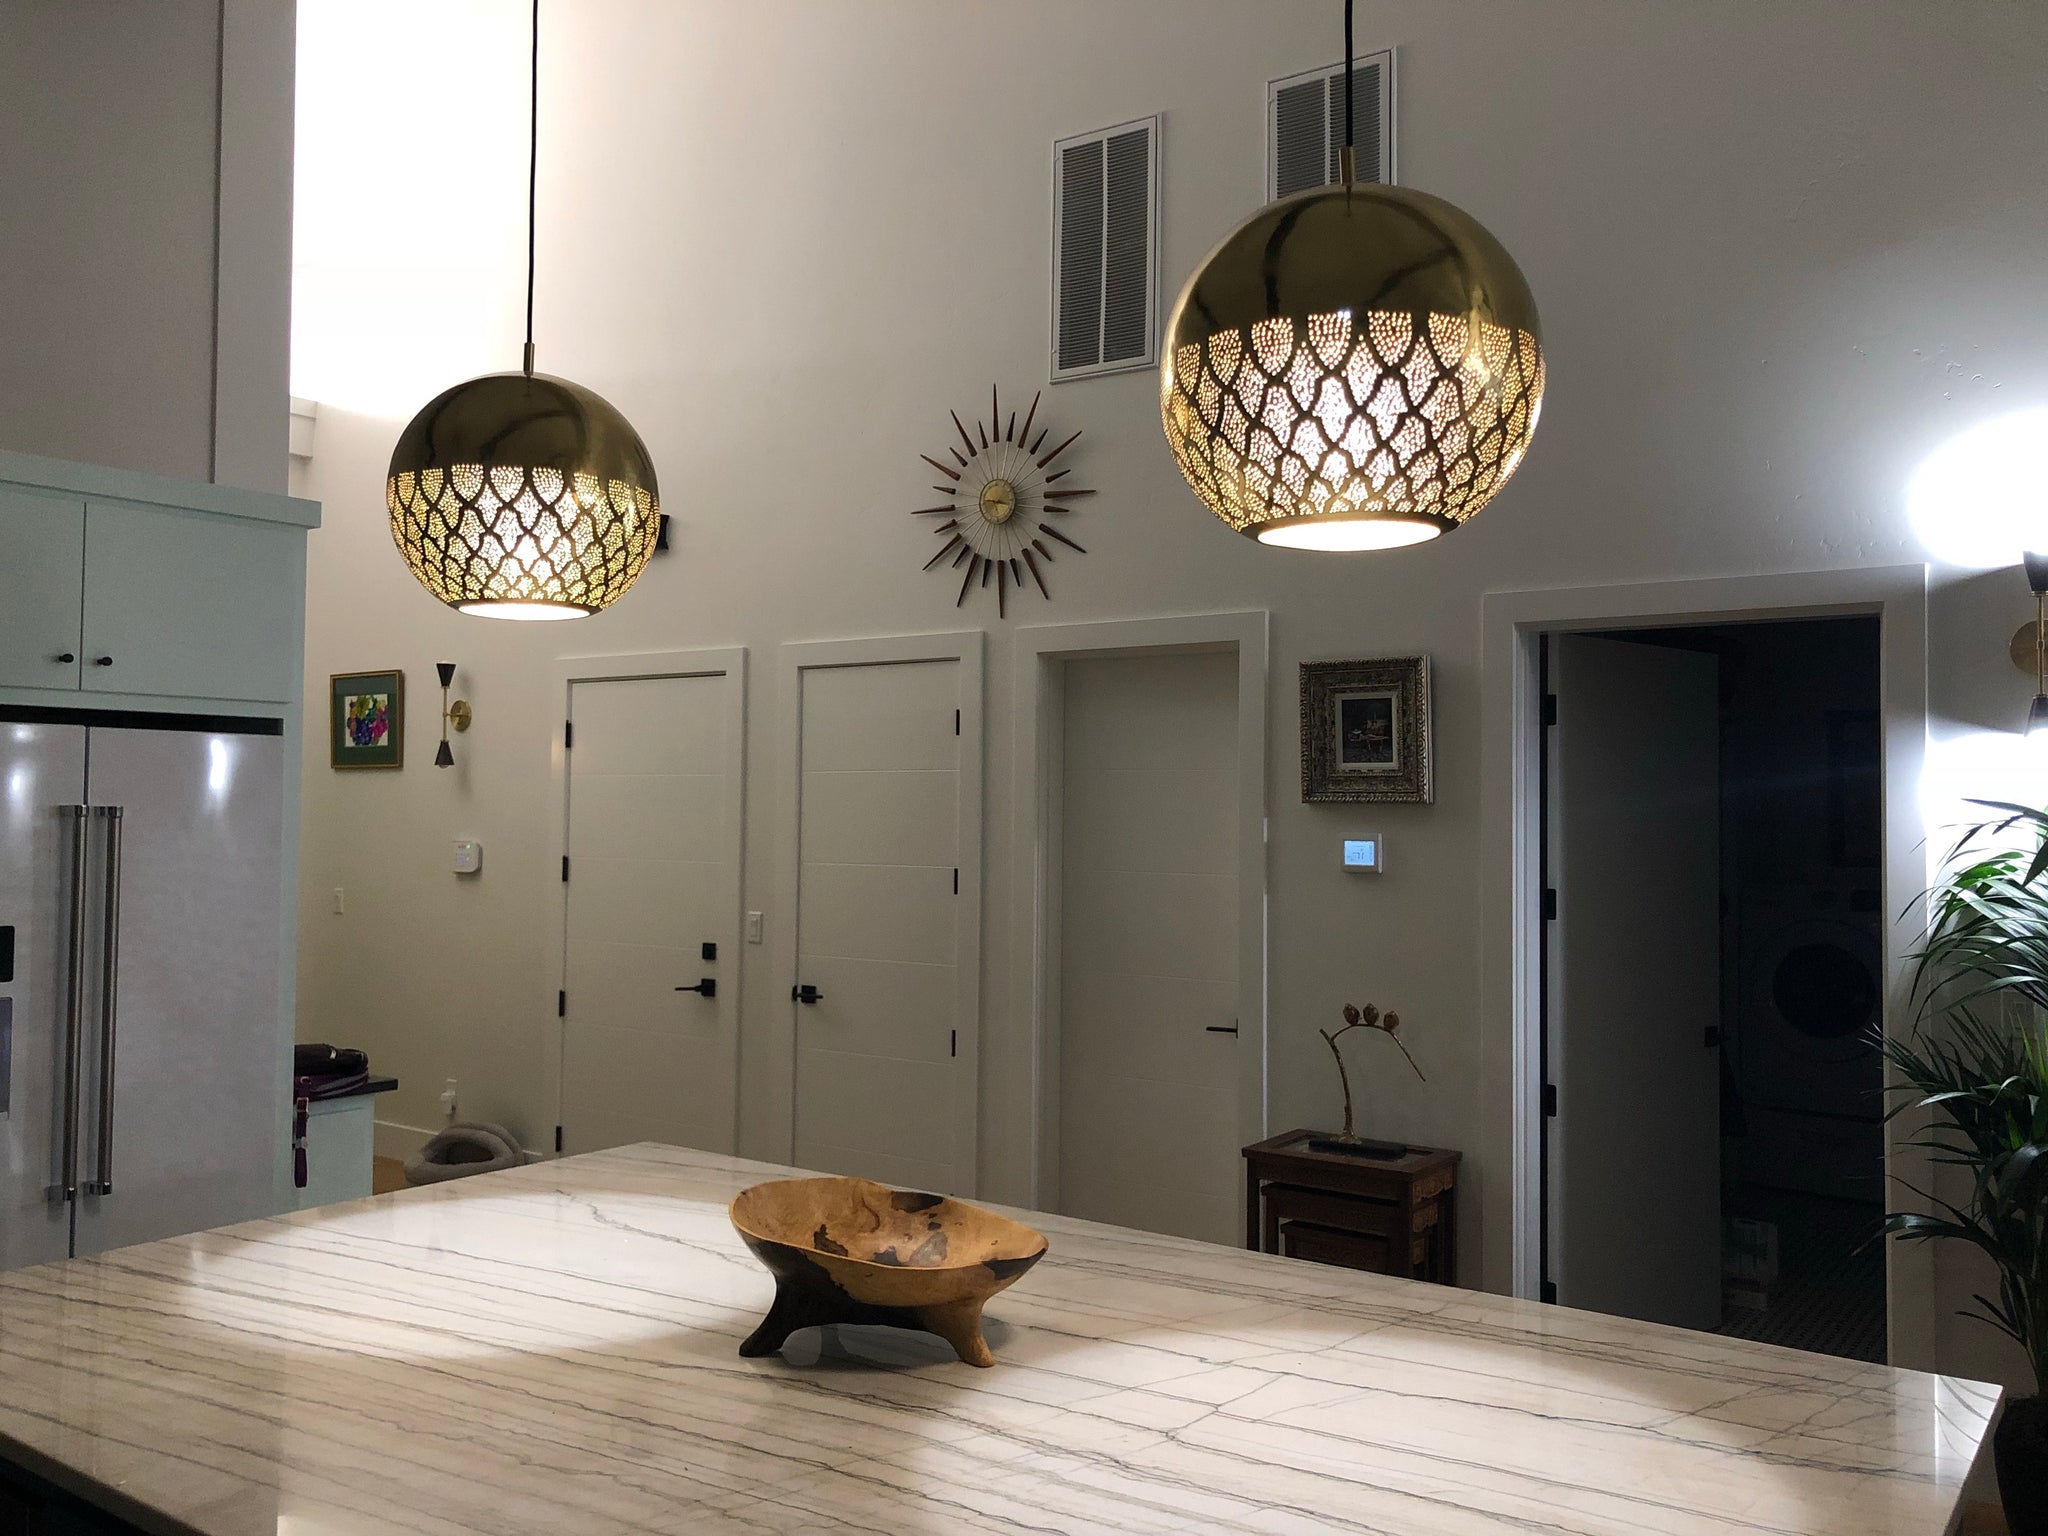 How to Hang Pendant Lights in a Kitchen